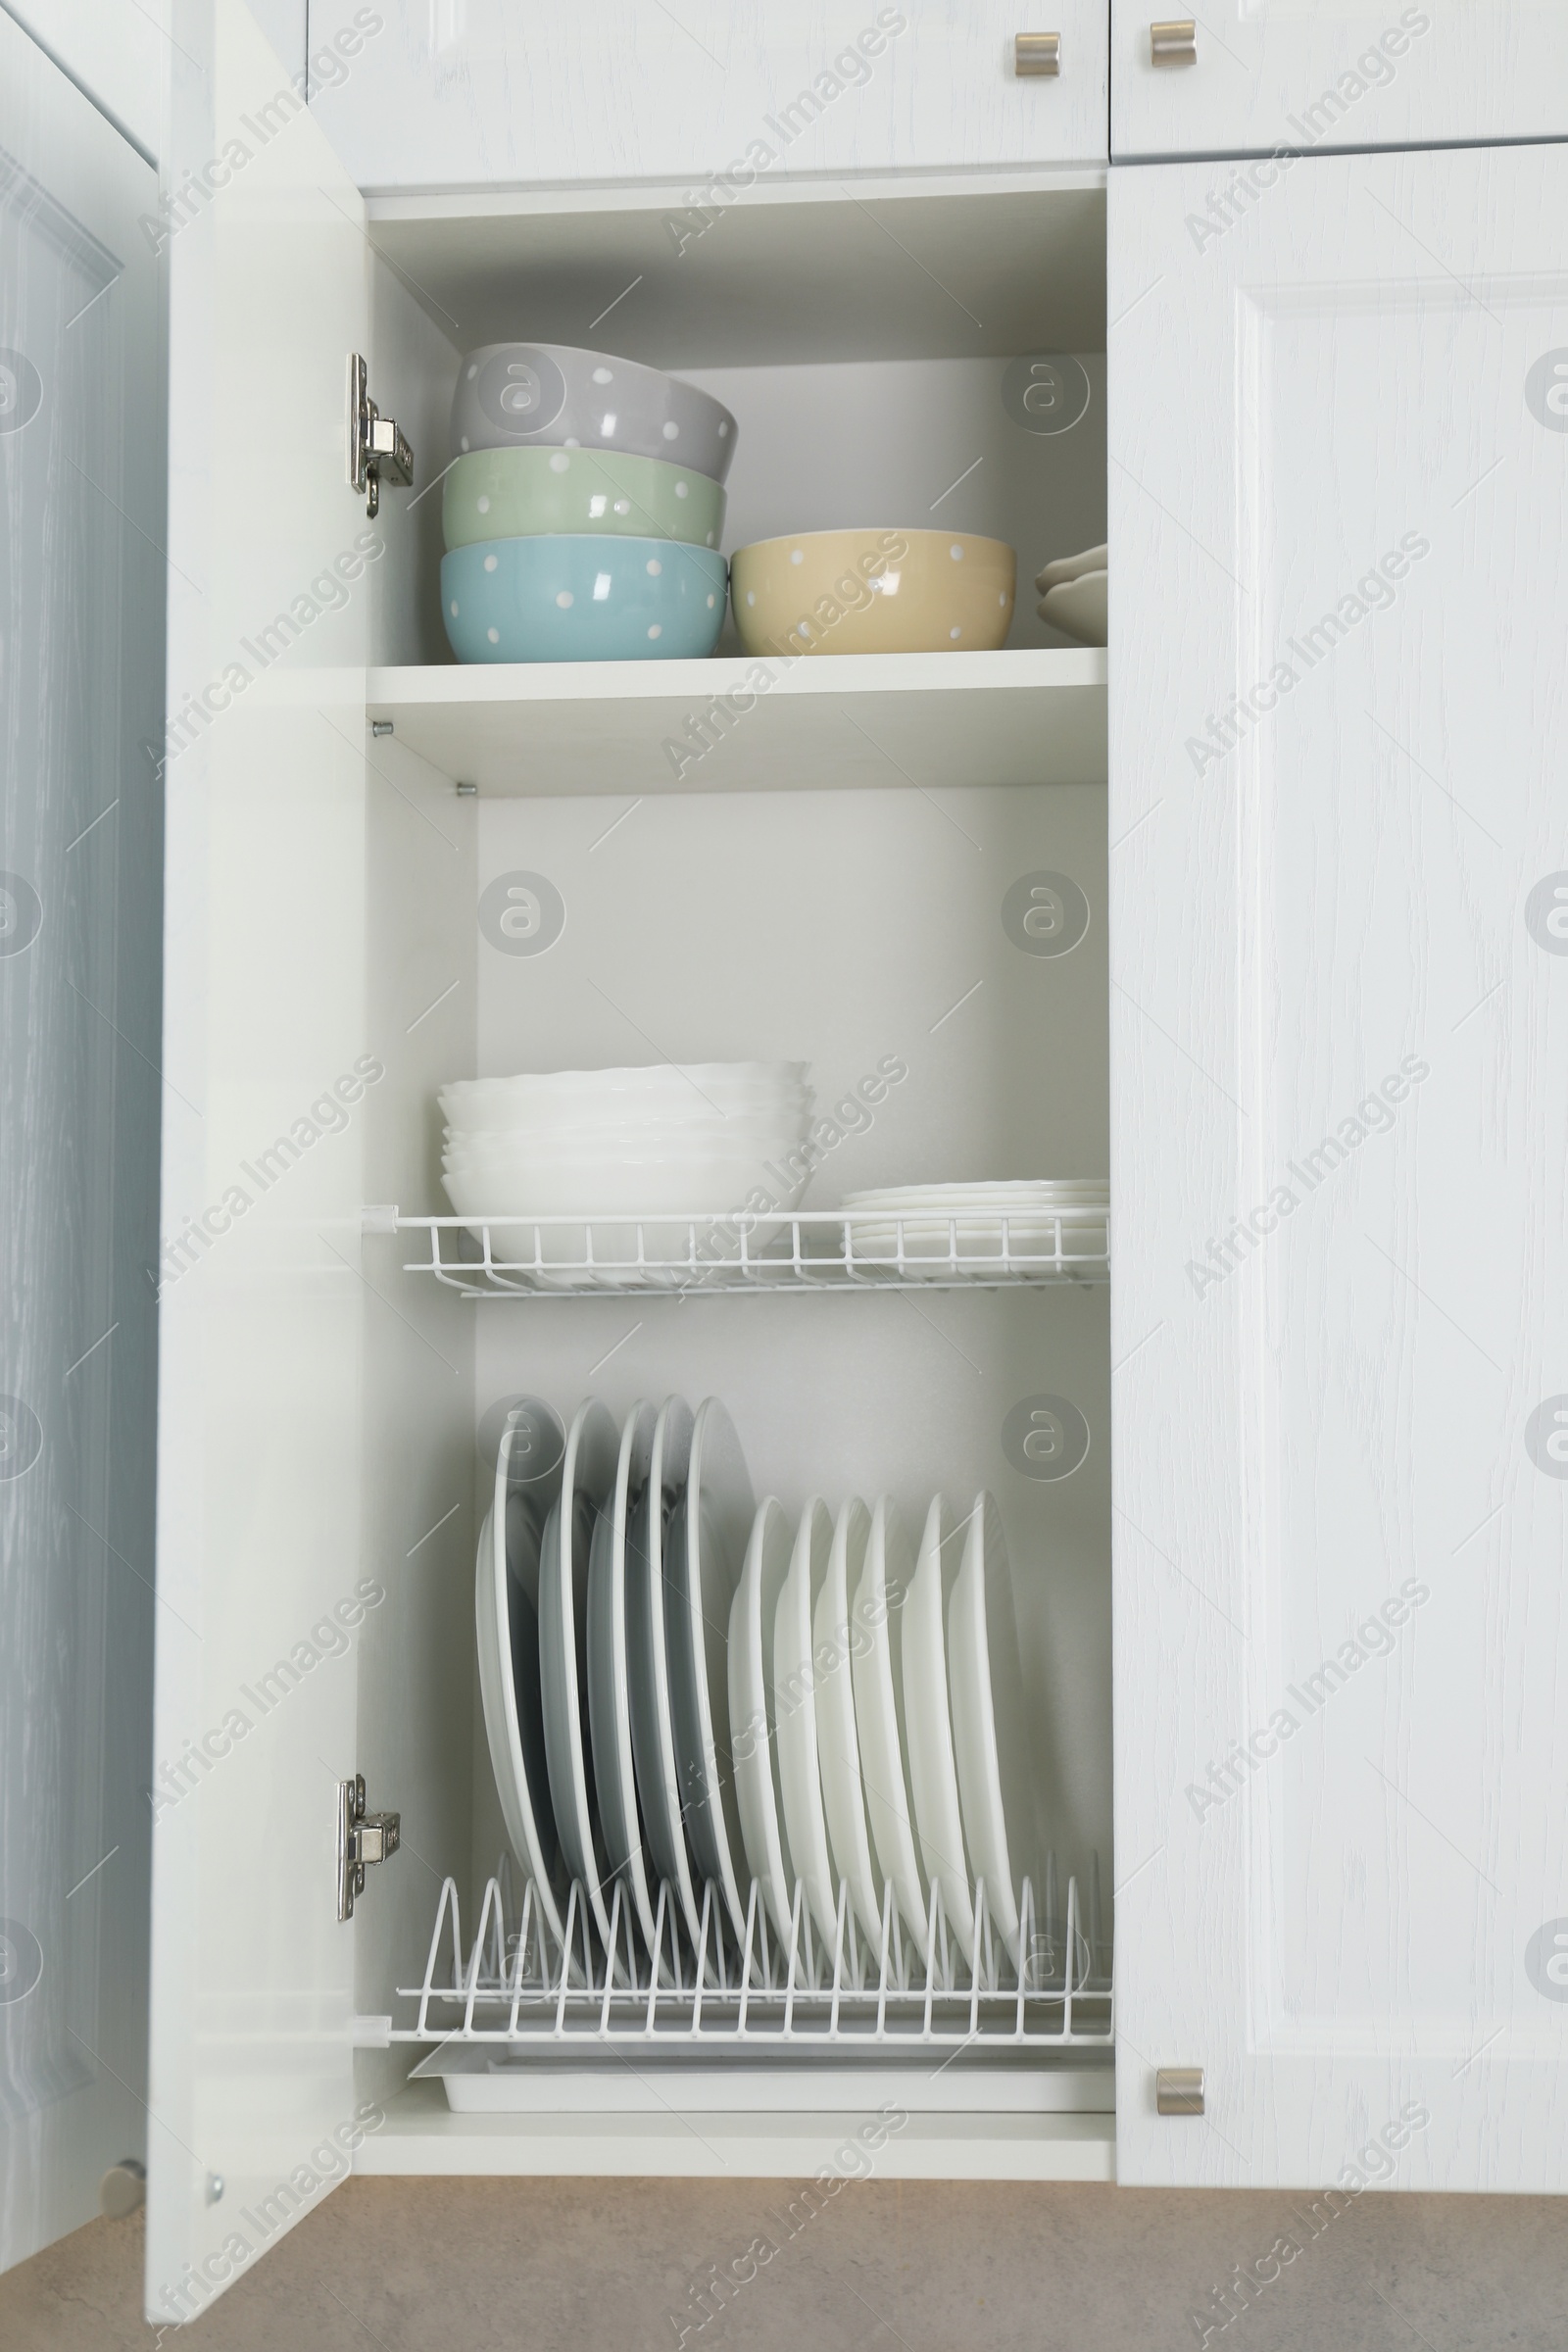 Photo of Clean plates and bowls on shelves in cabinet indoors